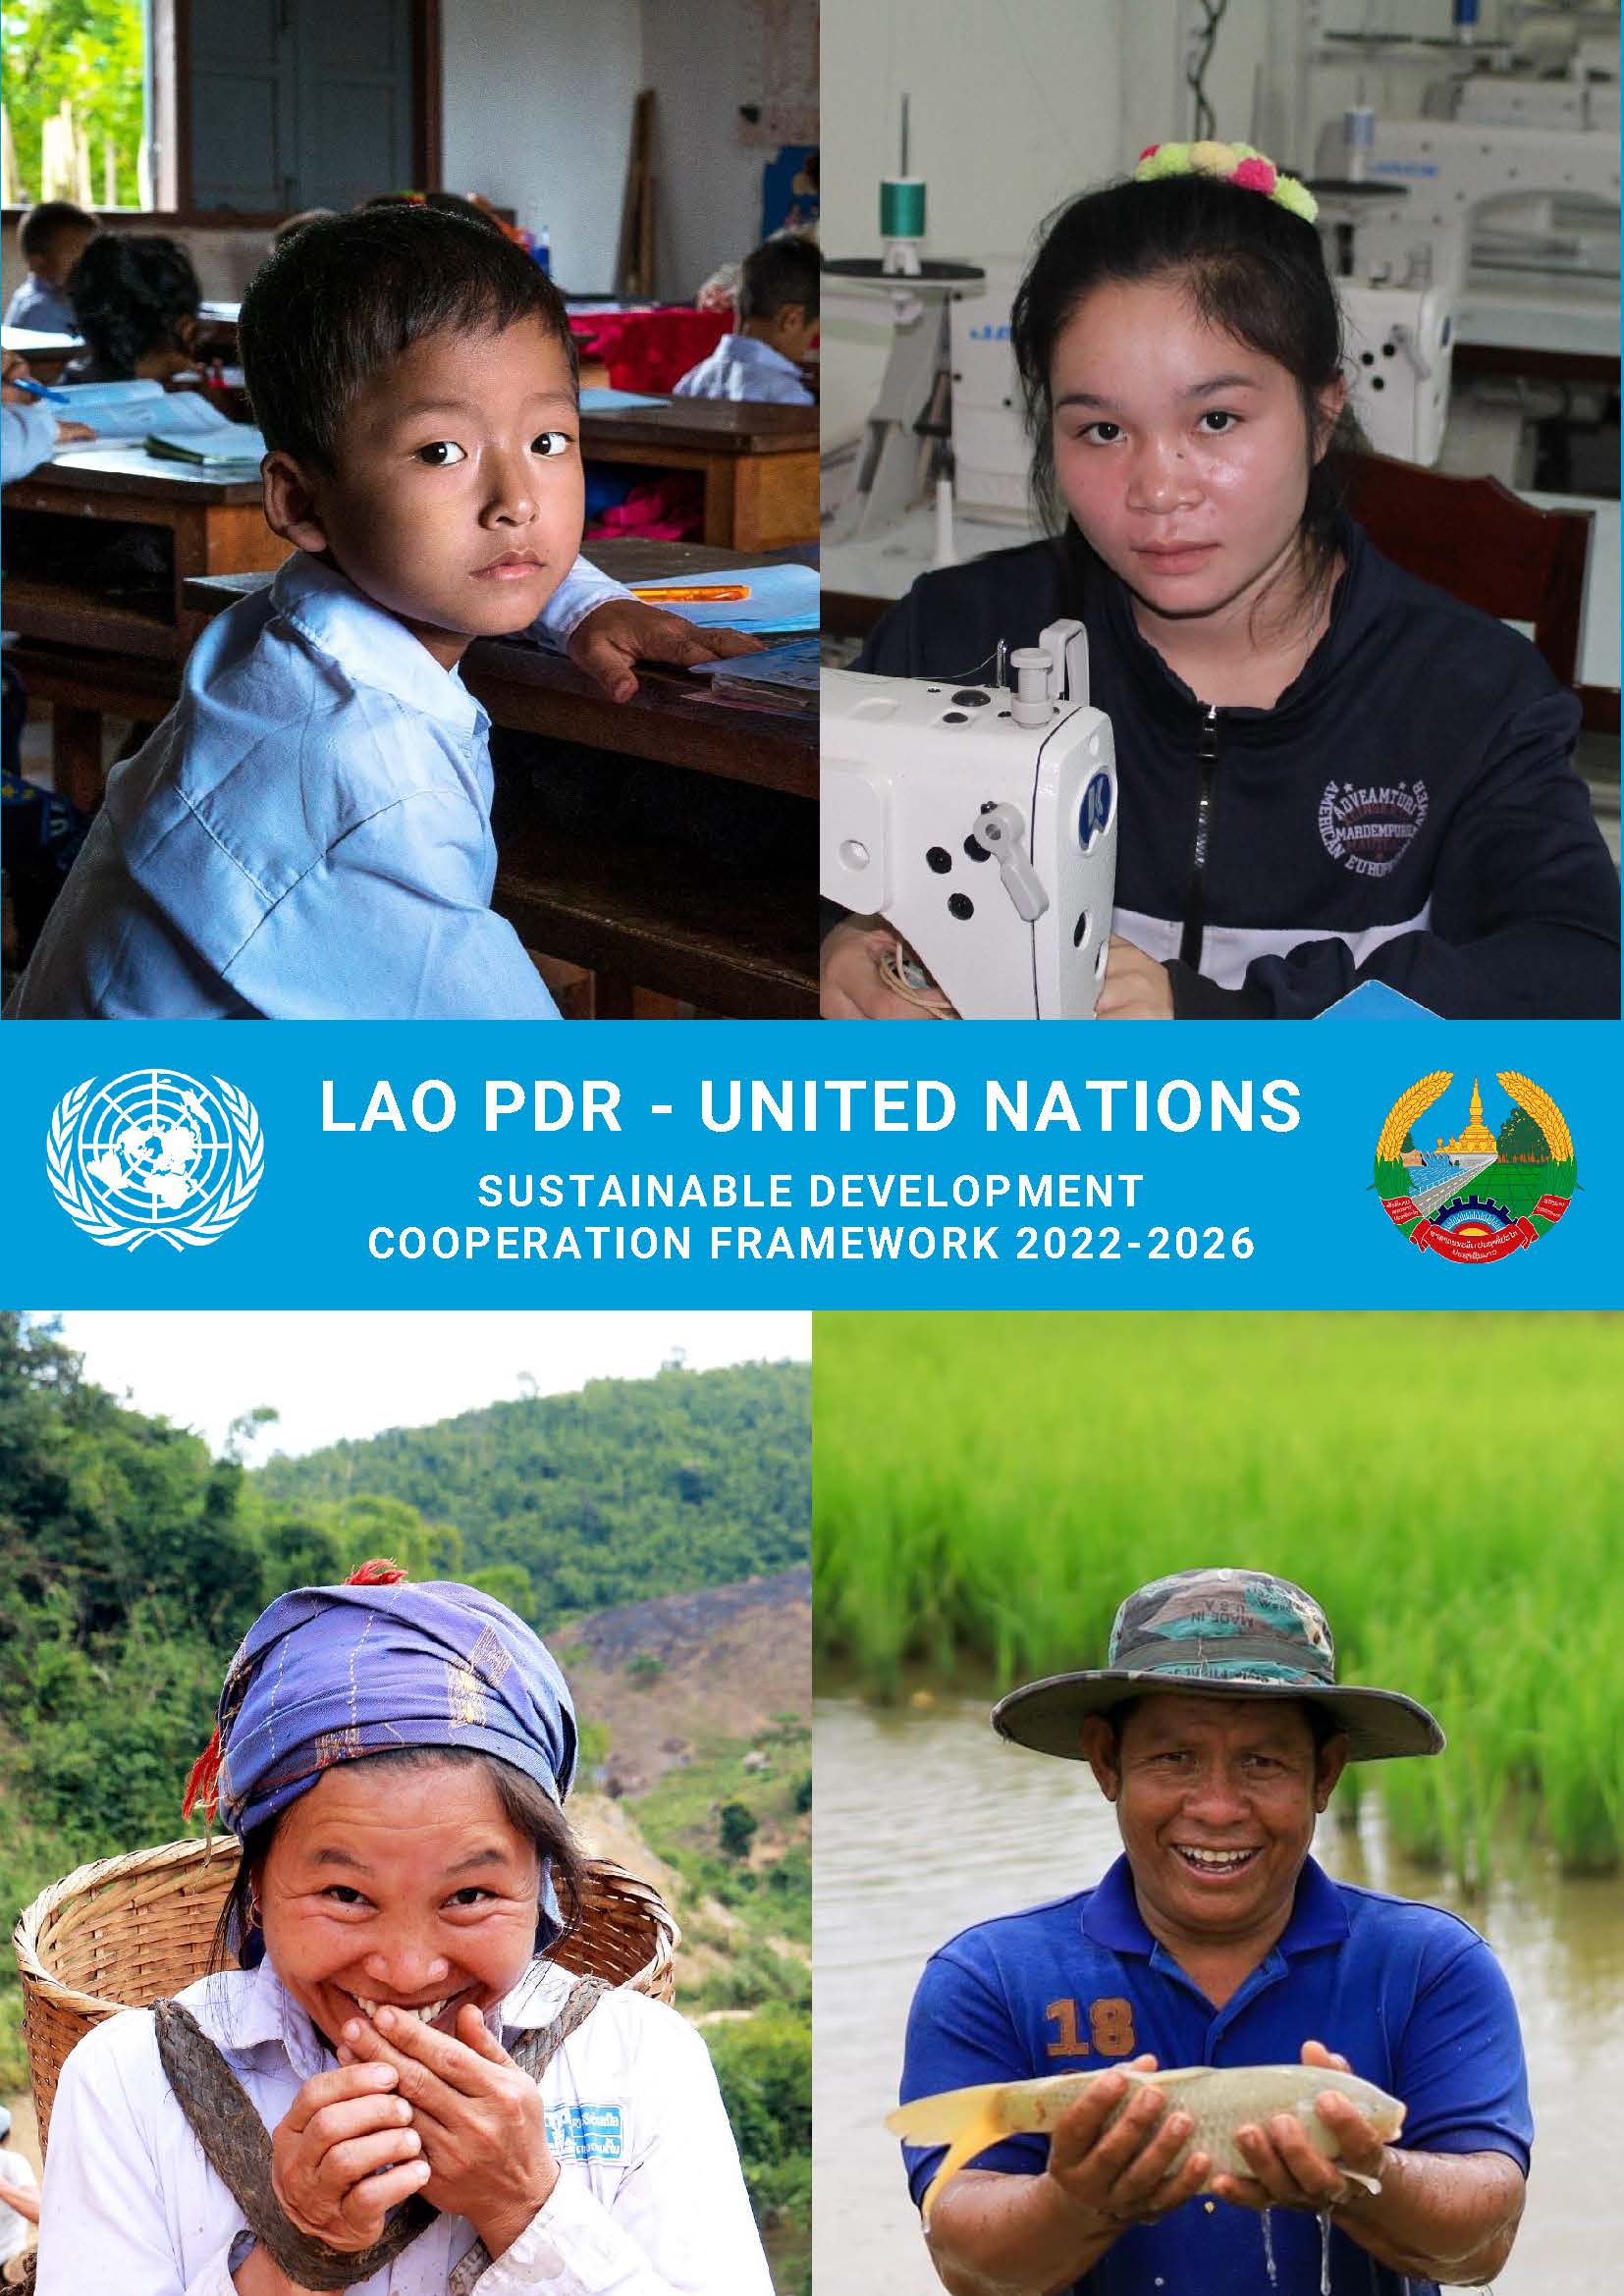 Lao PDR - United Nations Sustainable Development Cooperation Framework 2022-2026